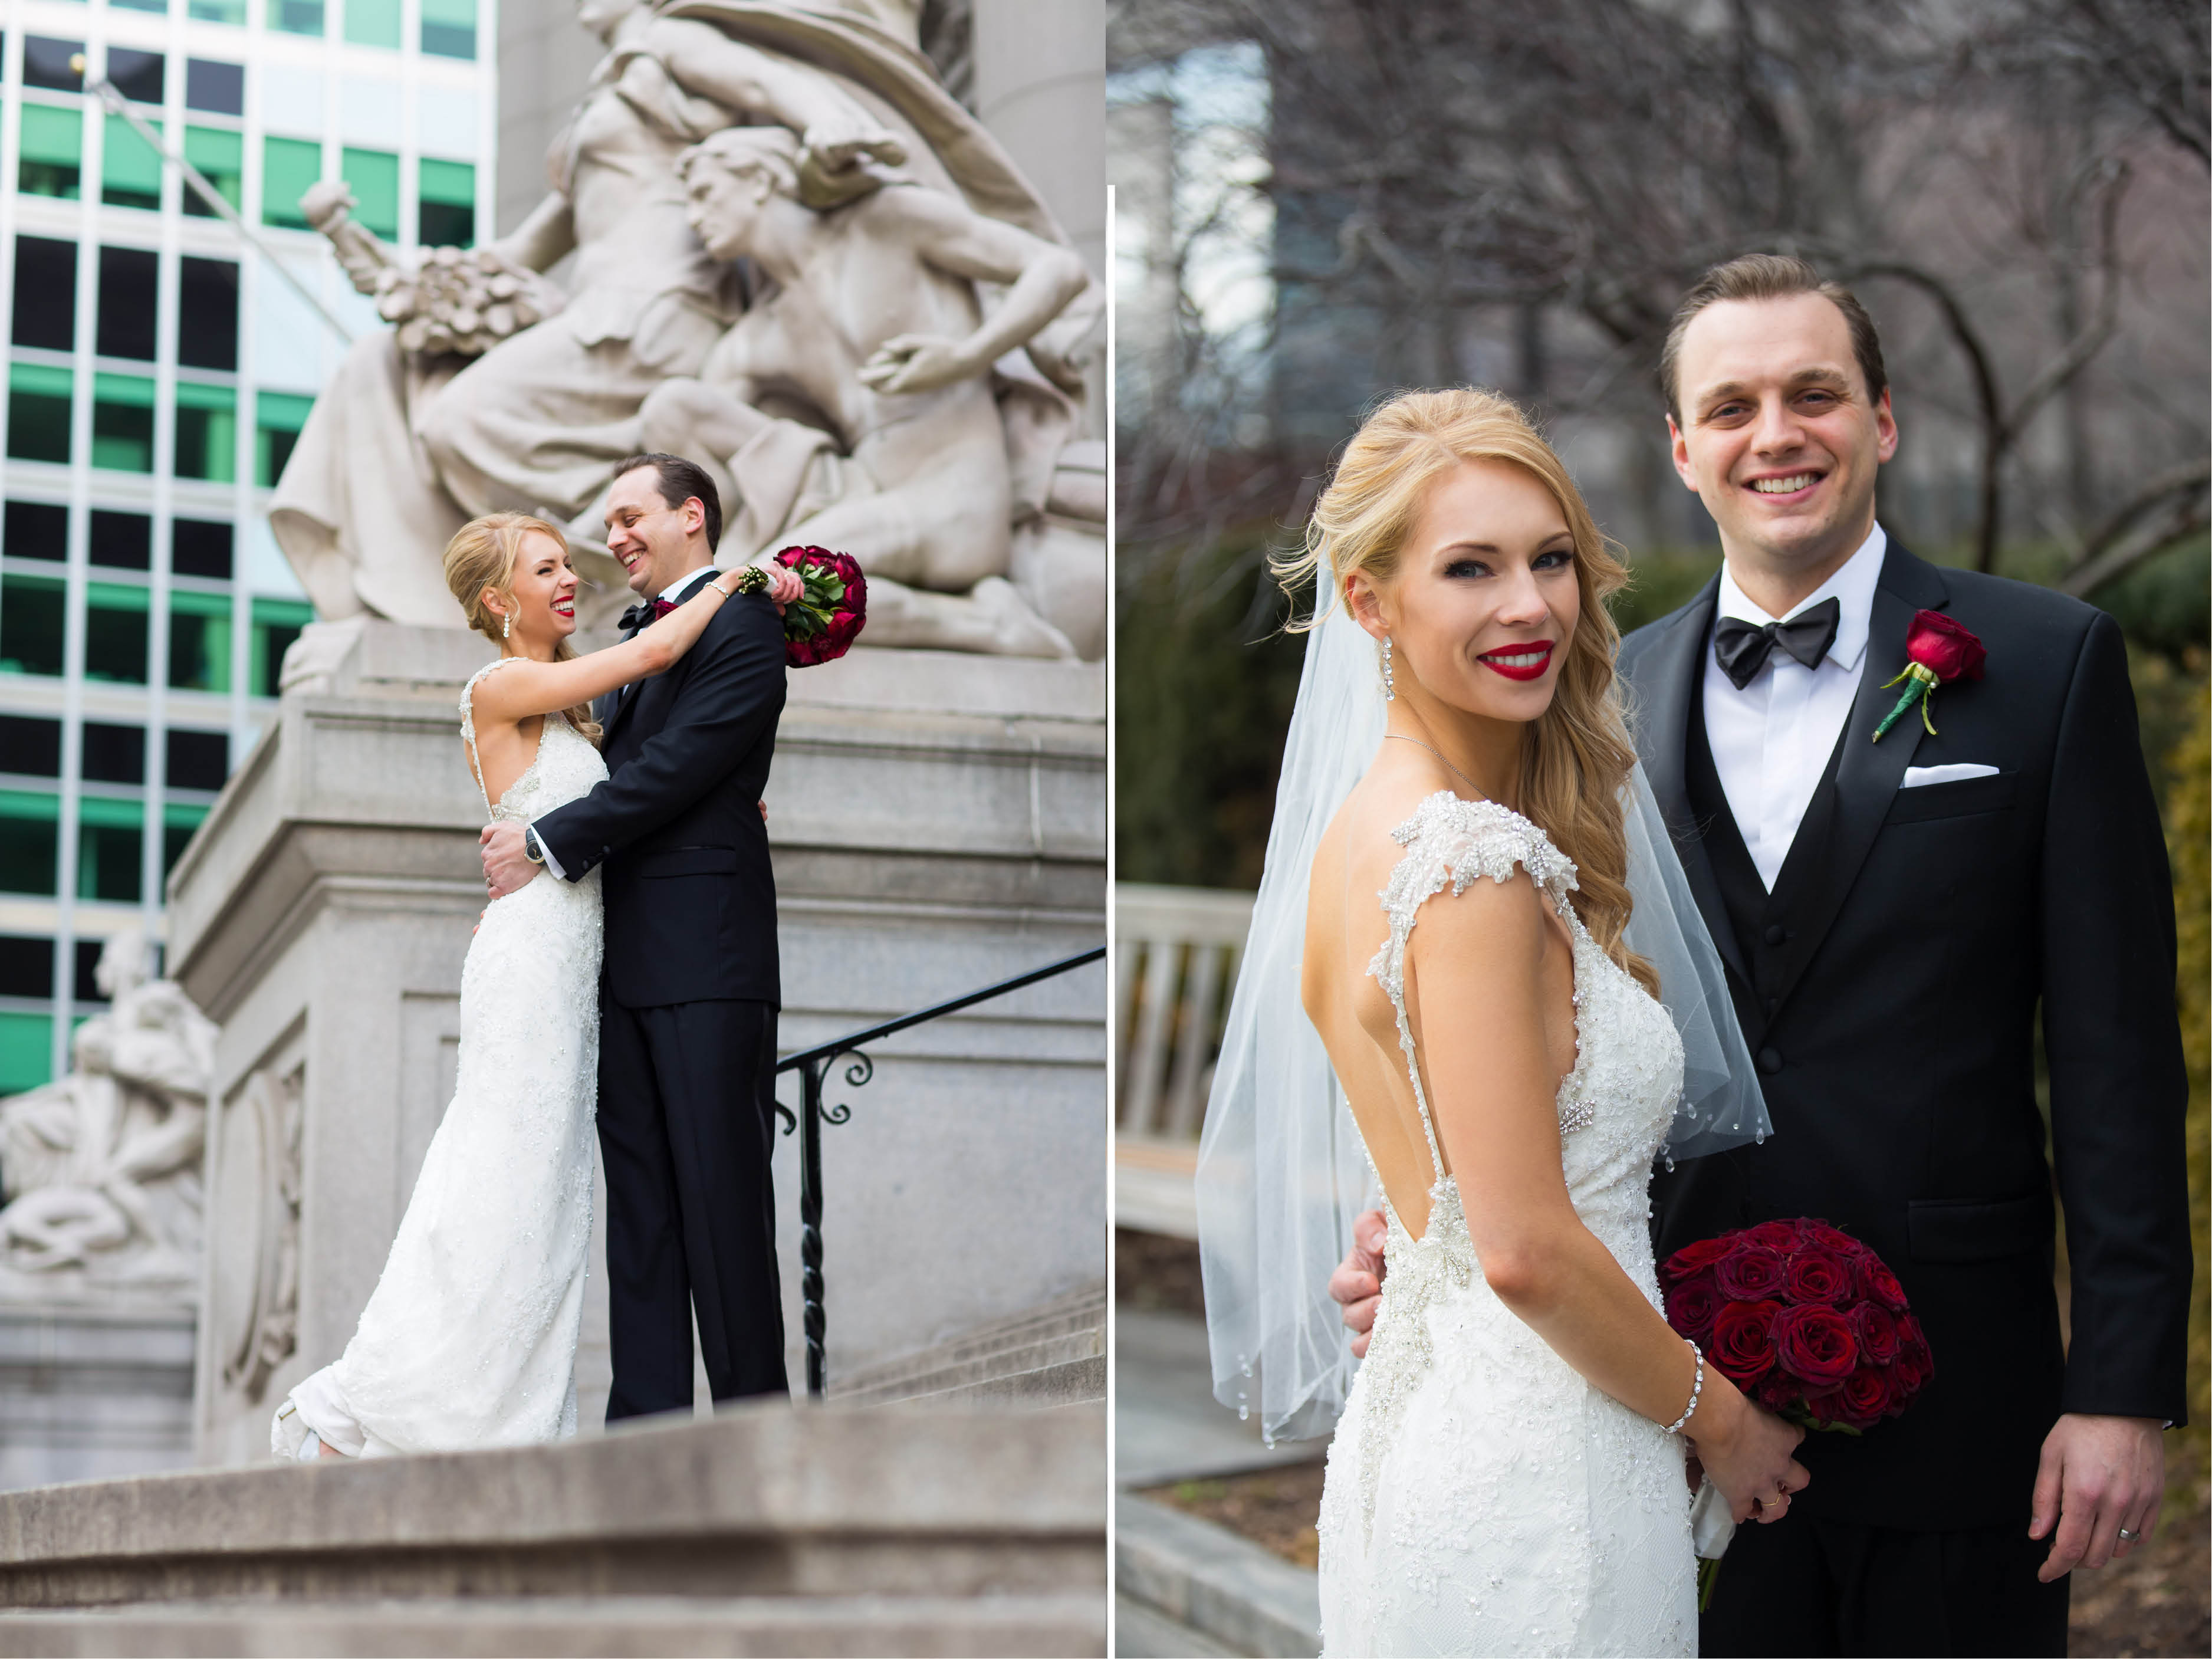 Emma_cleary_photography India House wedding4